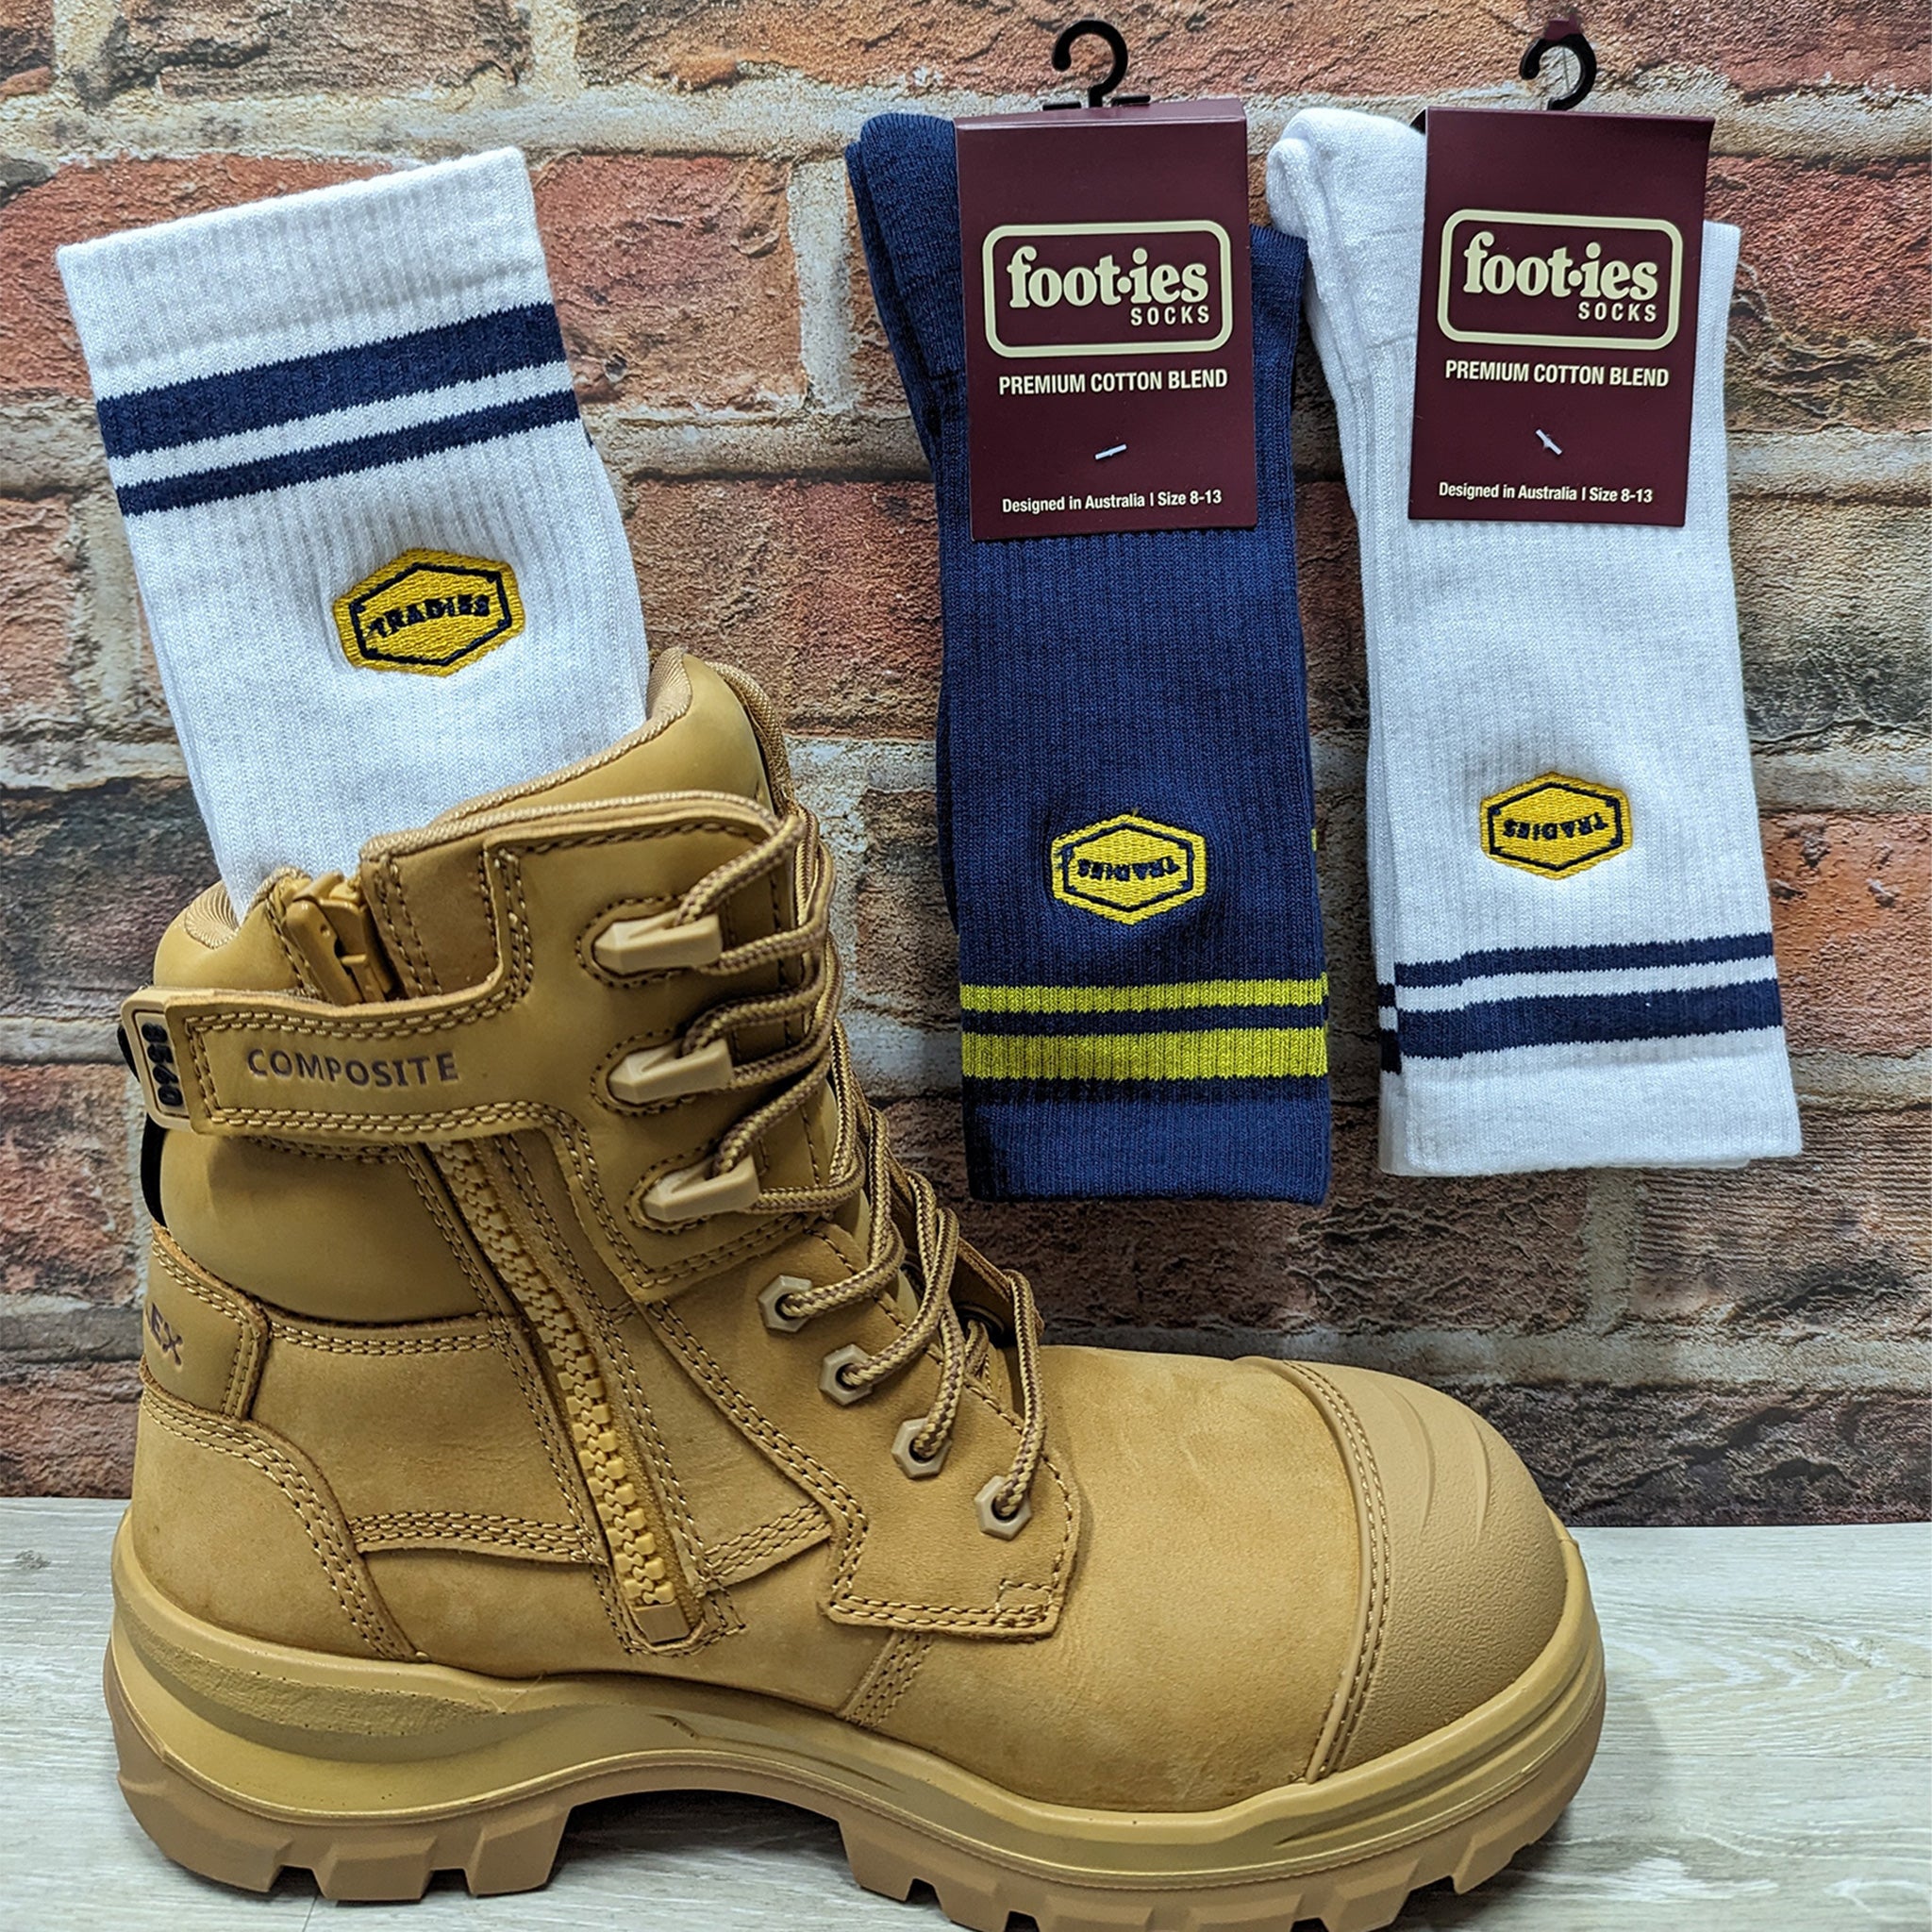 Tradie Debuts The Aussie-Est Socks Ever In New Work Featuring